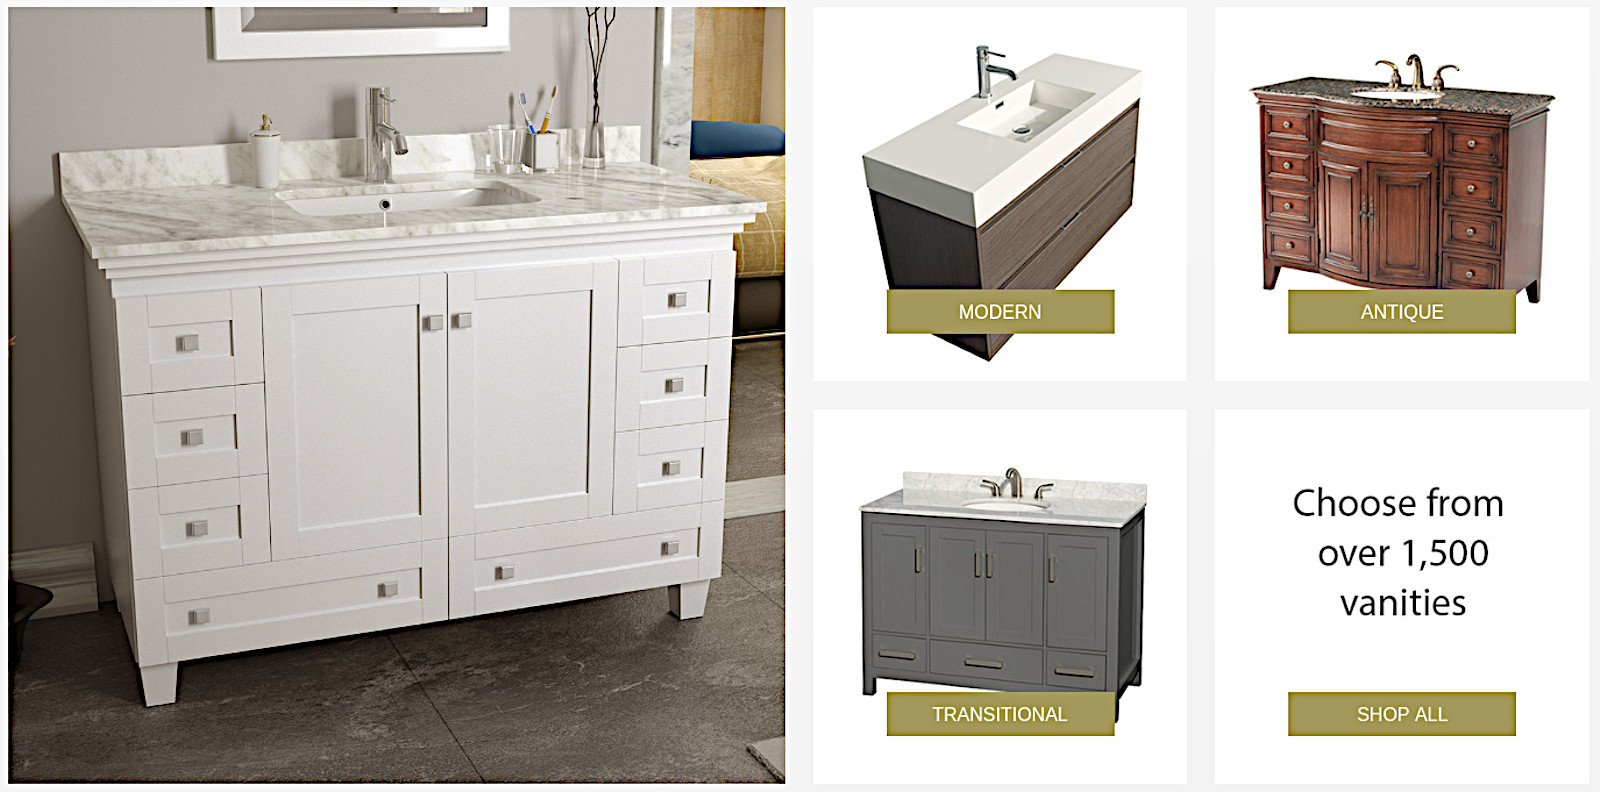 Discount Rate modern antique transitional vanities